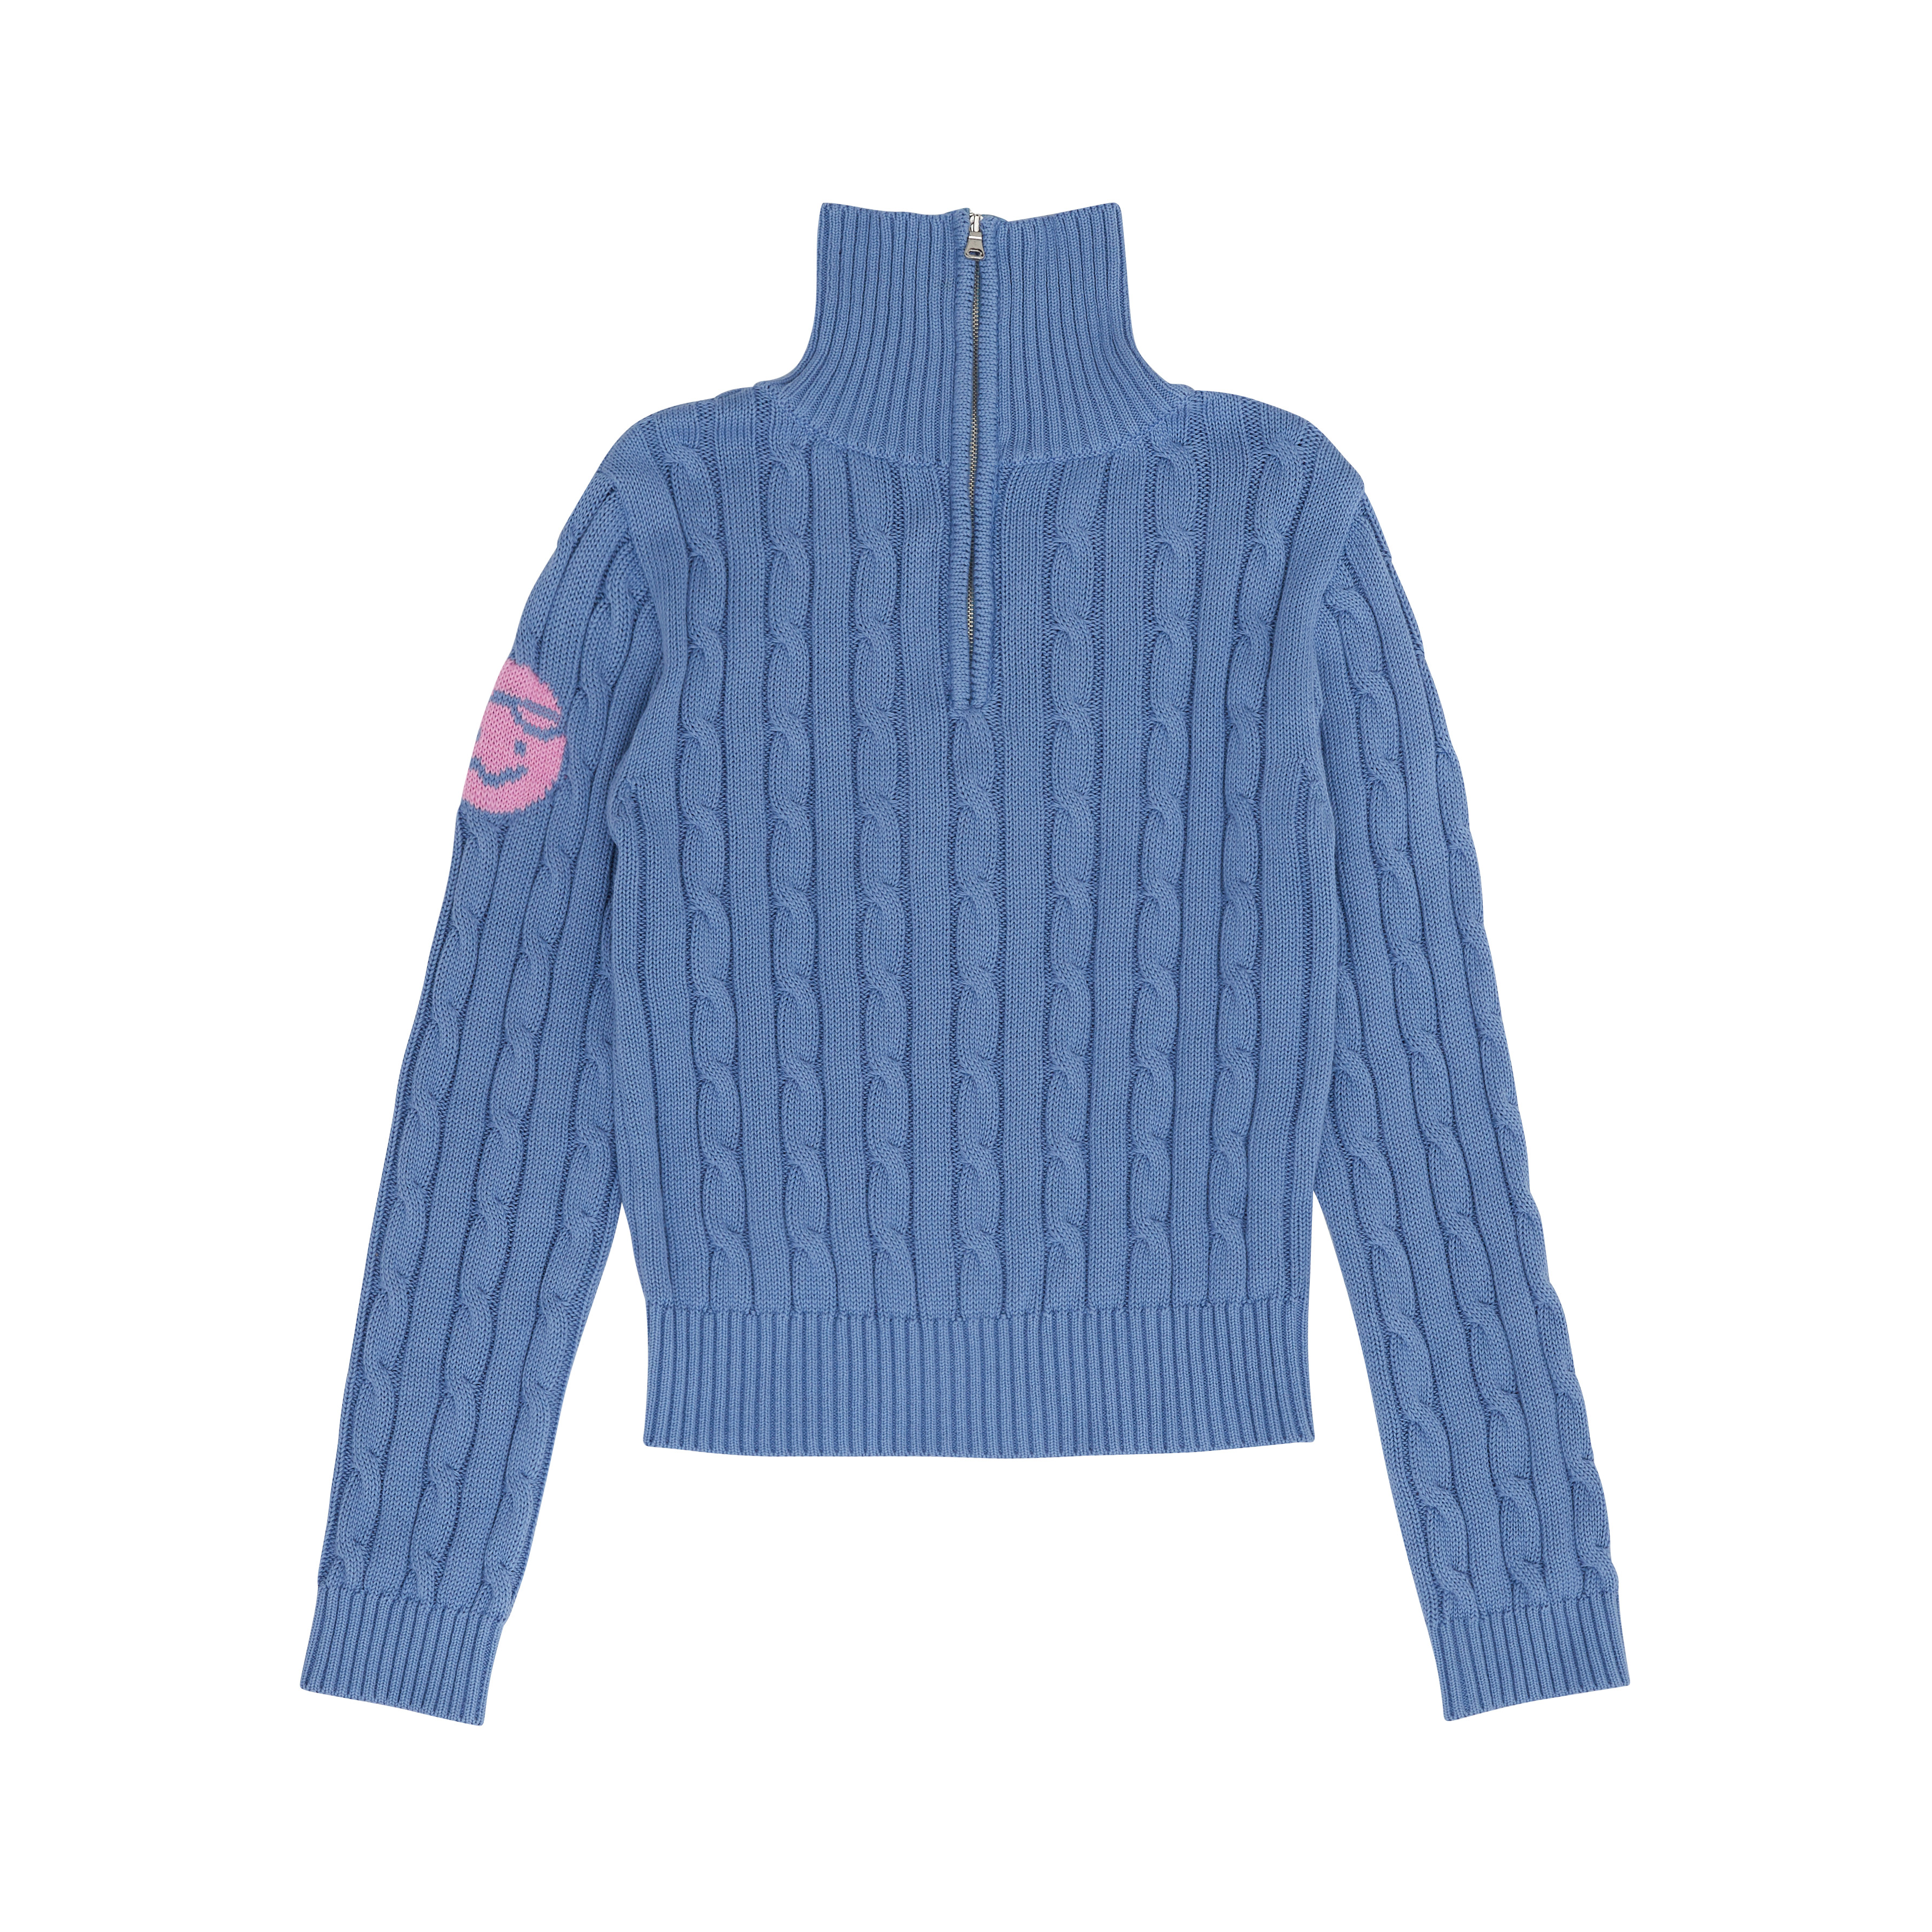 Cable knit half zip sweater